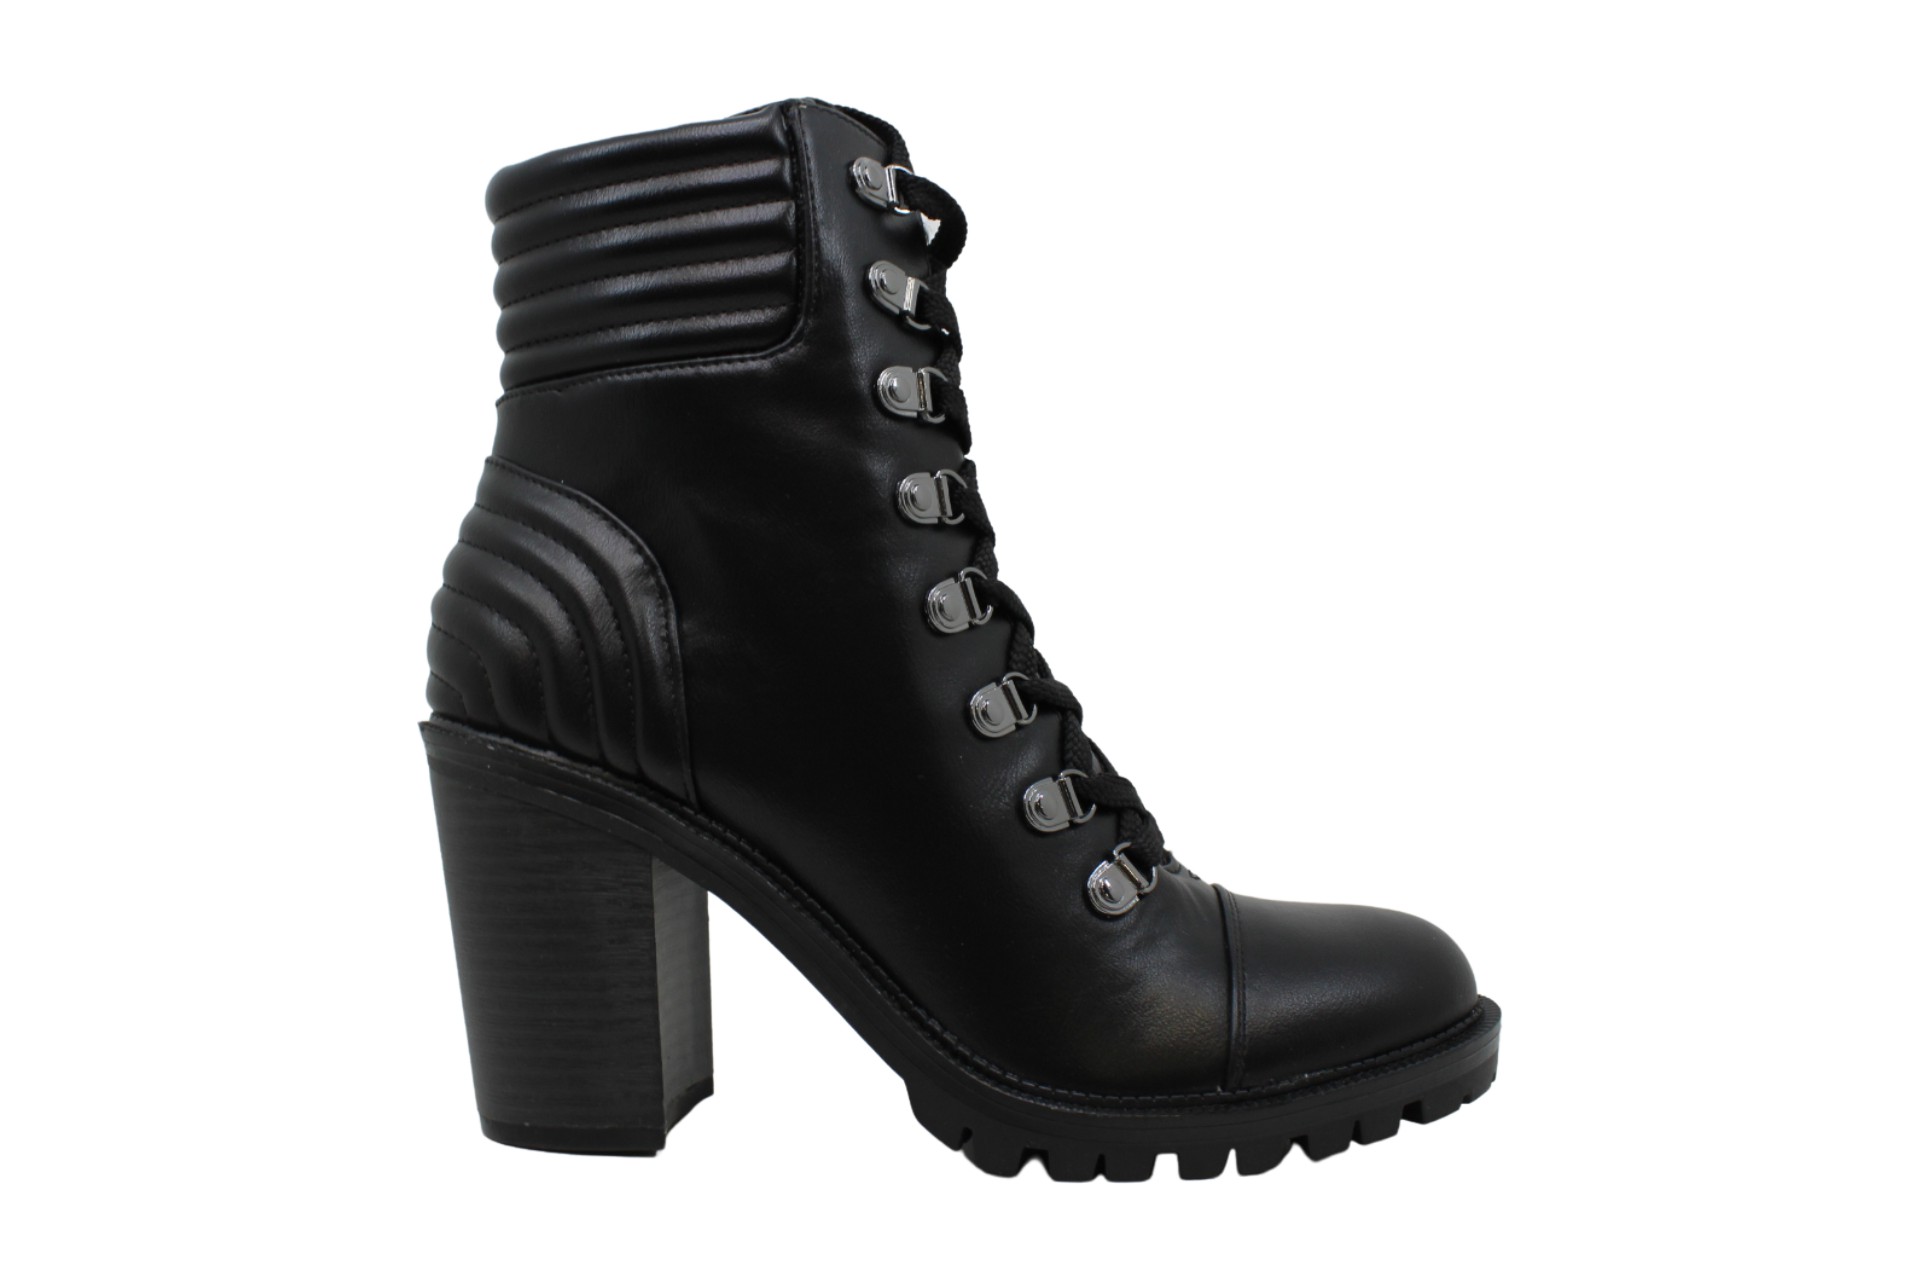 Guess Women's Shoes Jetti Leather Round Toe Ankle Fashion Boots, Black ...